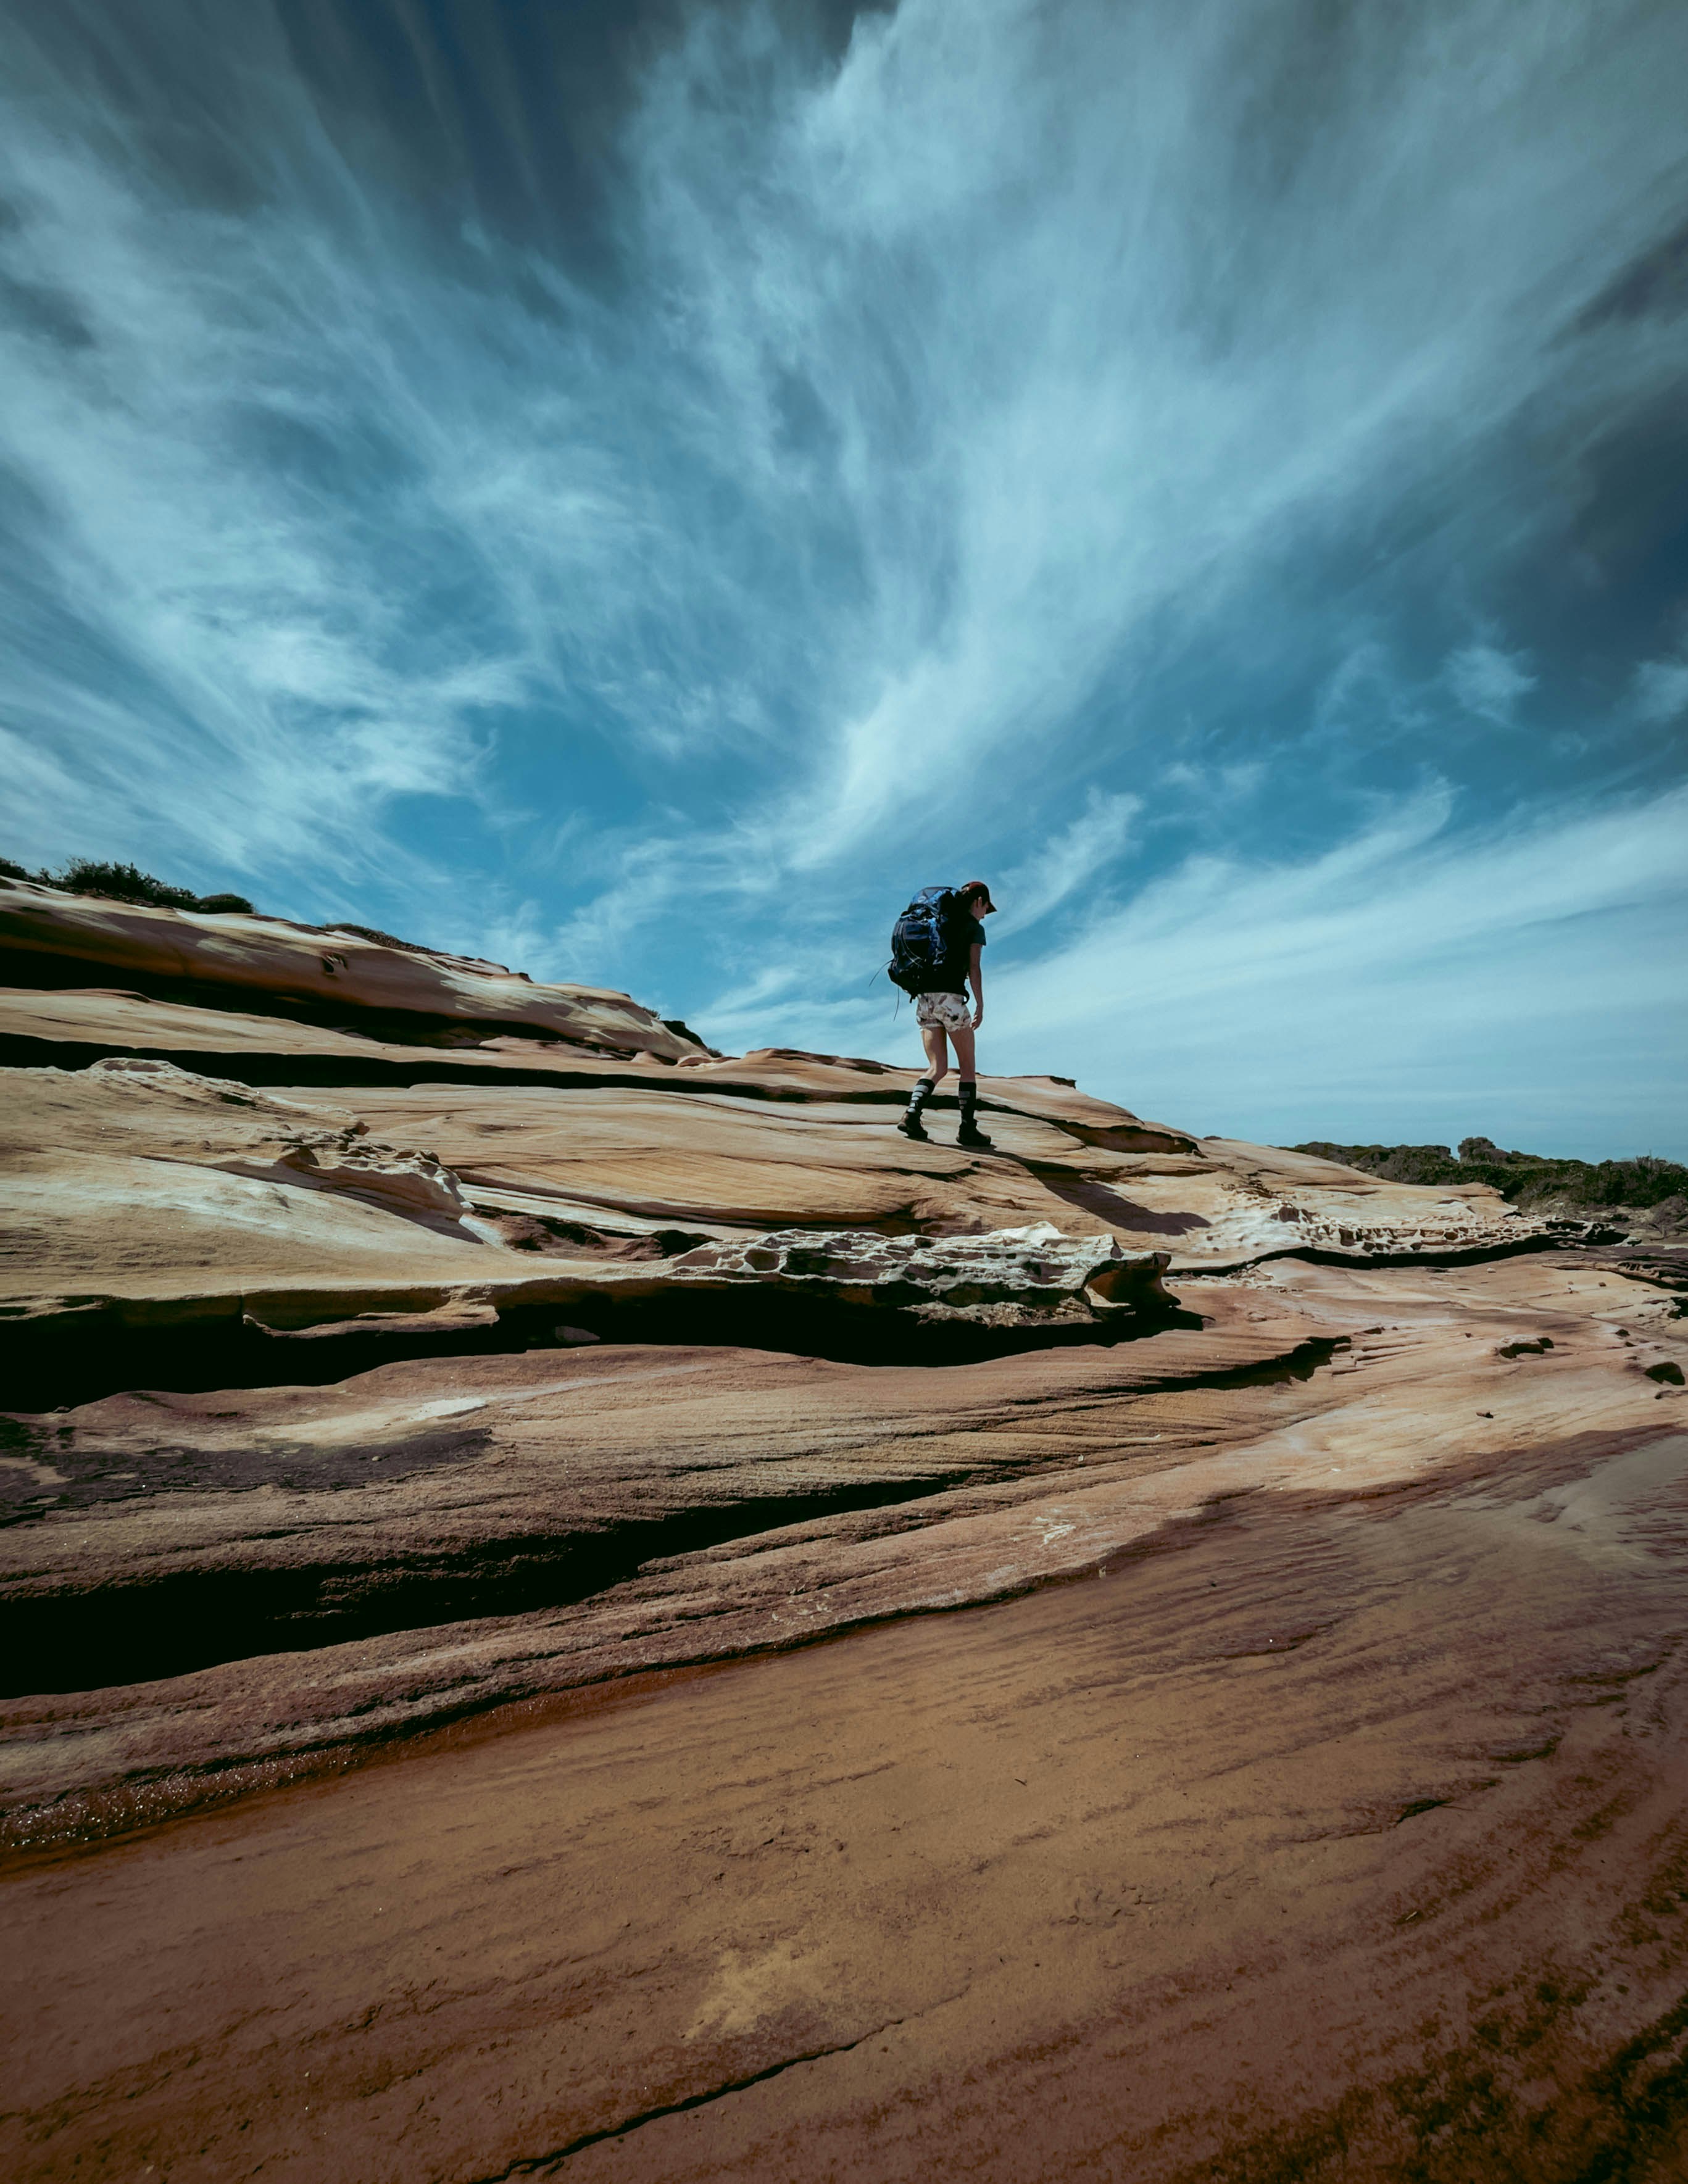 person standing on brown rock formation under blue sky during daytime